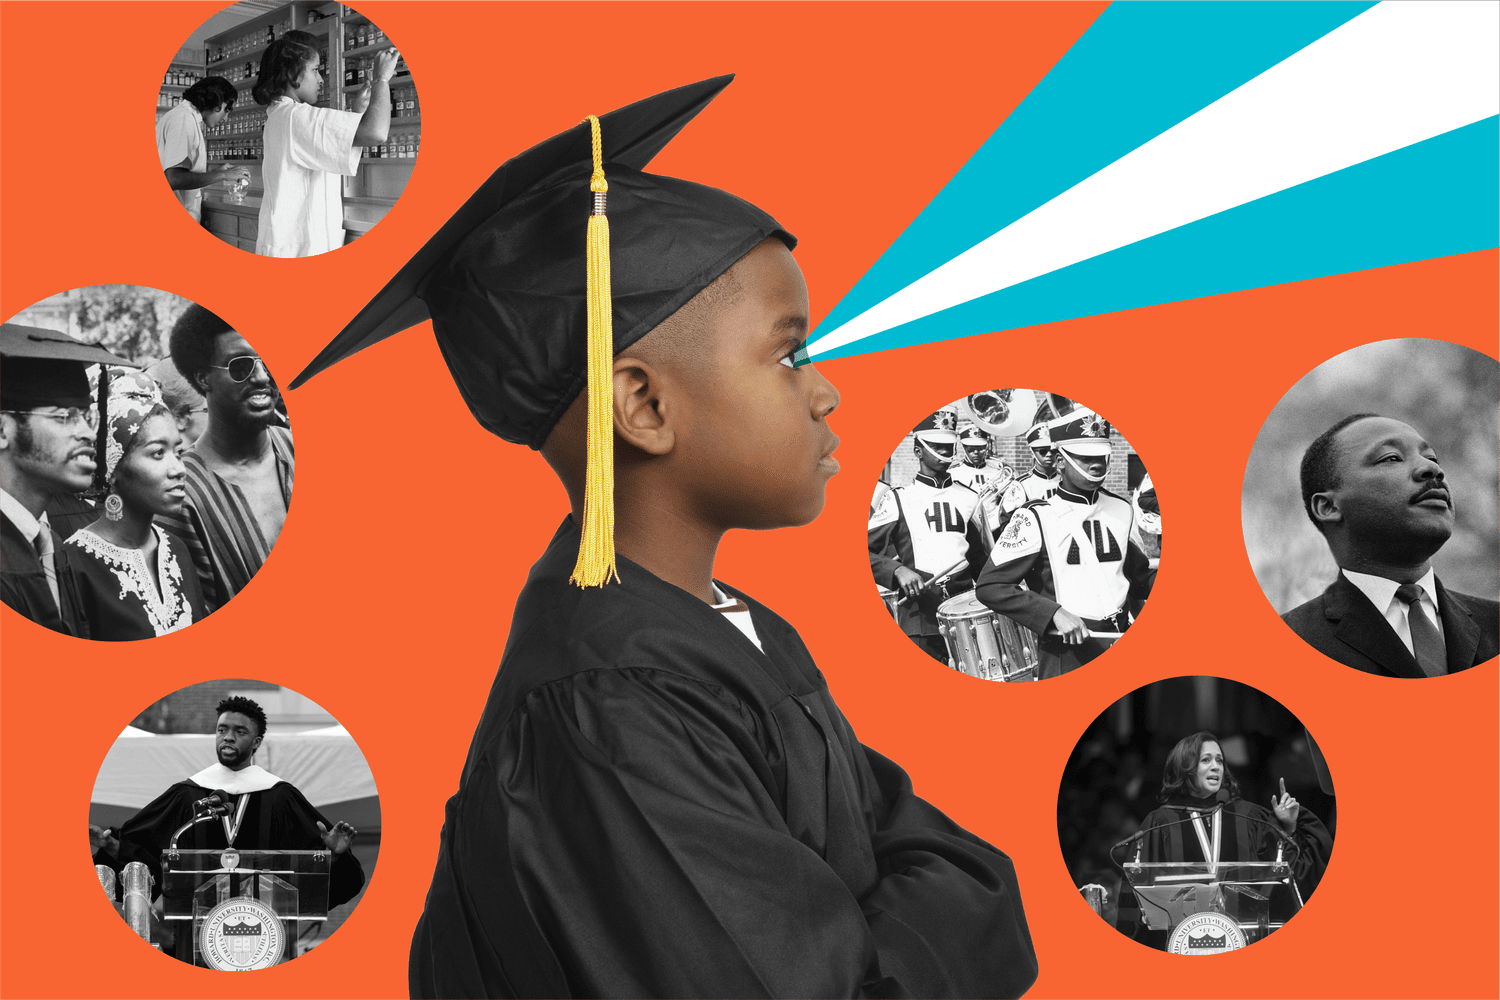 An illustration of a little boy graduating from a HBCU with historical figures and historical images surrounding him.